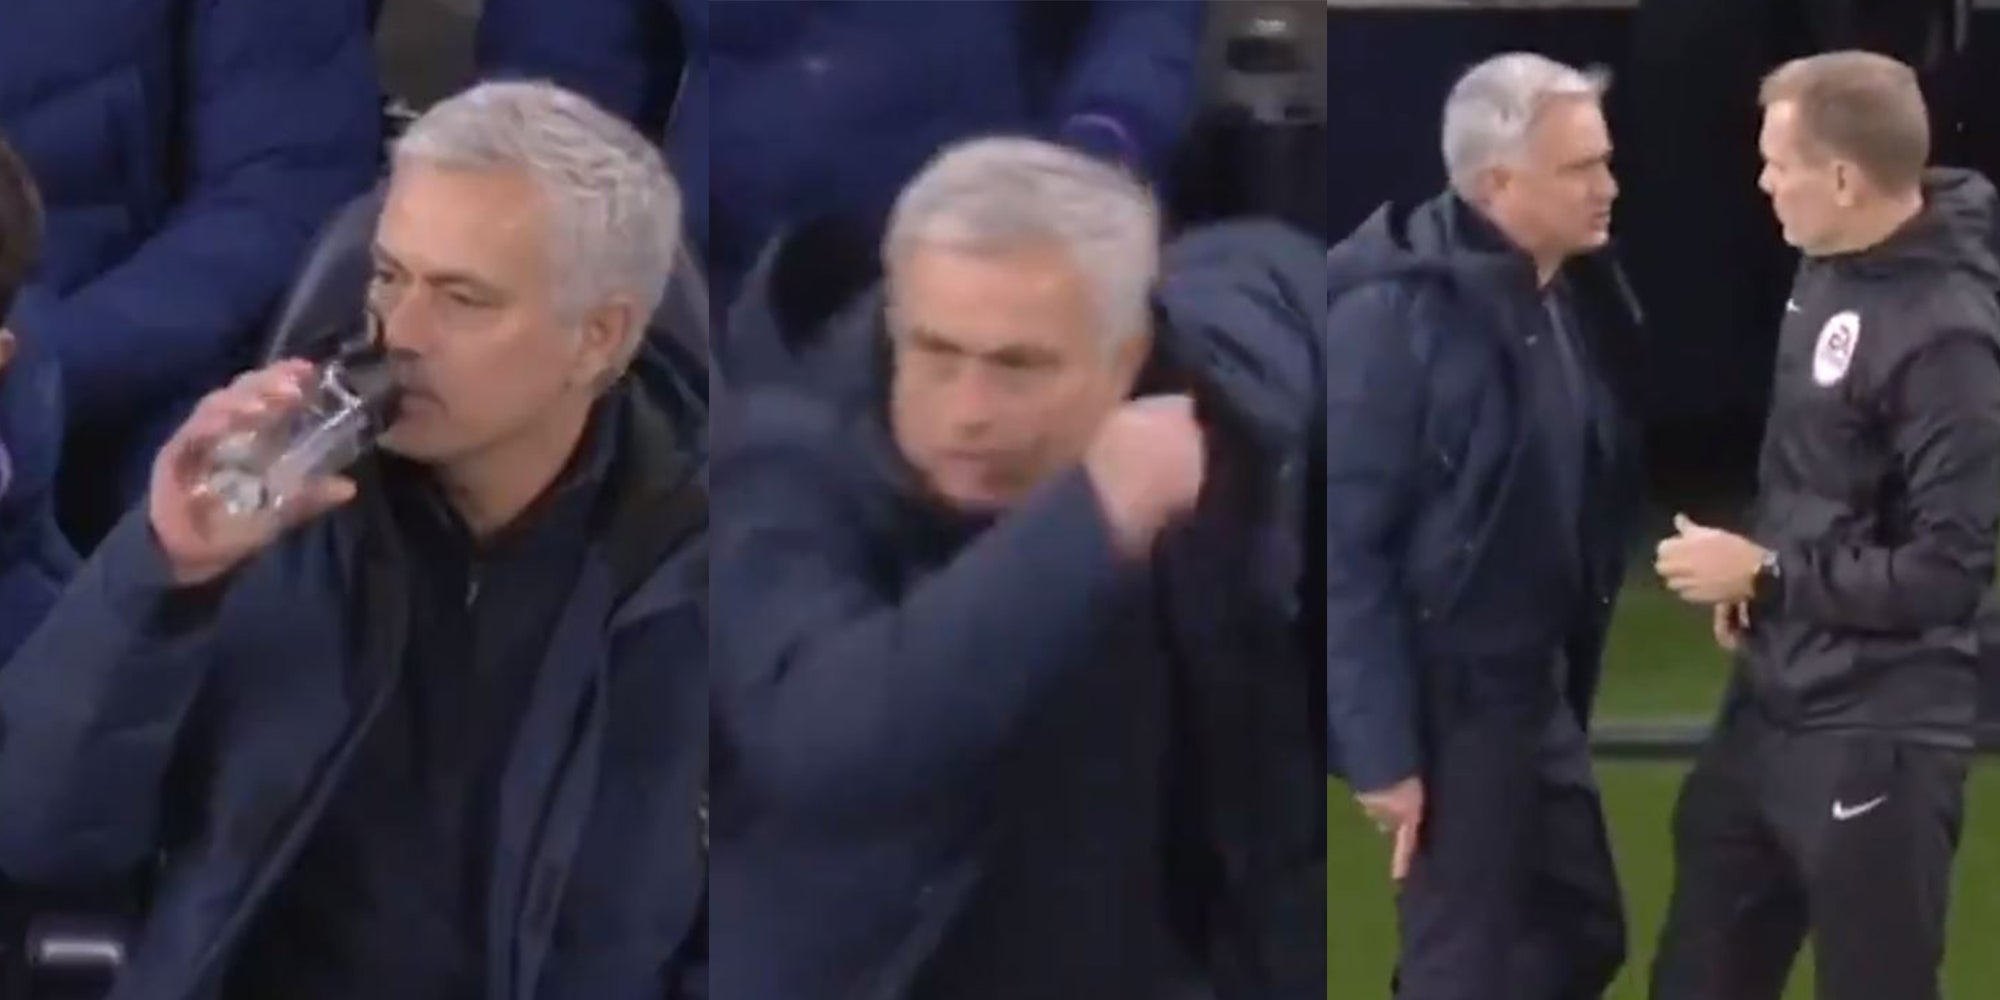 Jose Mourinho sprinting to complain to a referee has already become the yea...